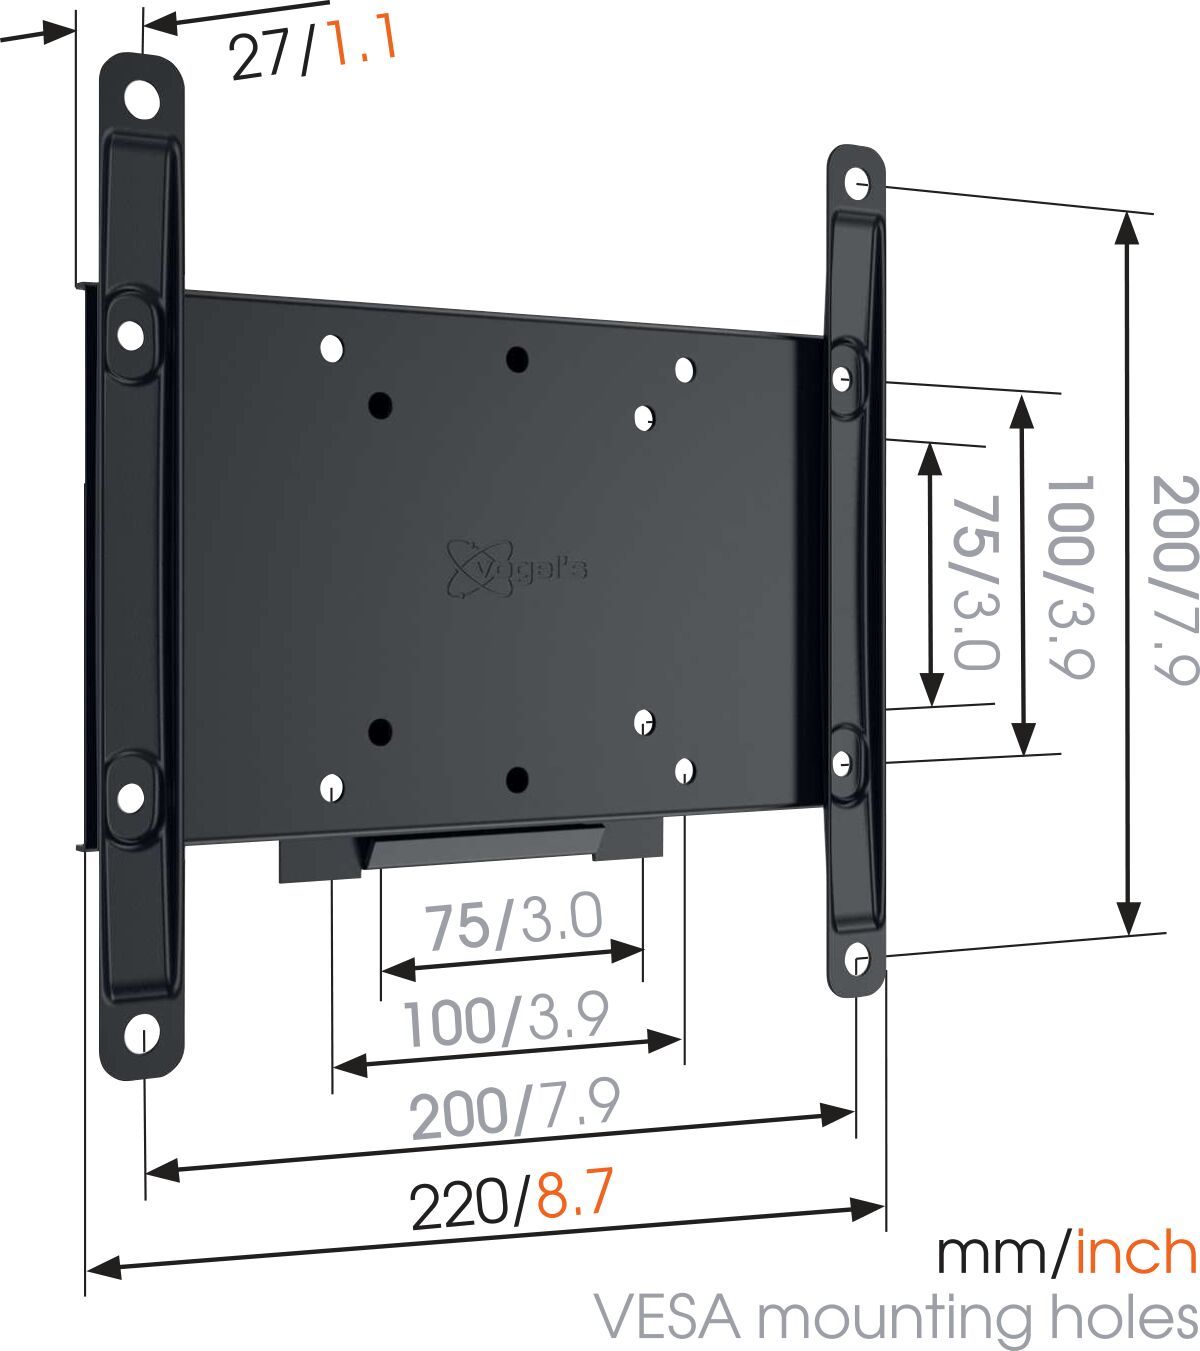 Vogel's MA 2000 Fixed TV Wall Mount - Suitable for 19 up to 43 inch TVs up to Dimensions